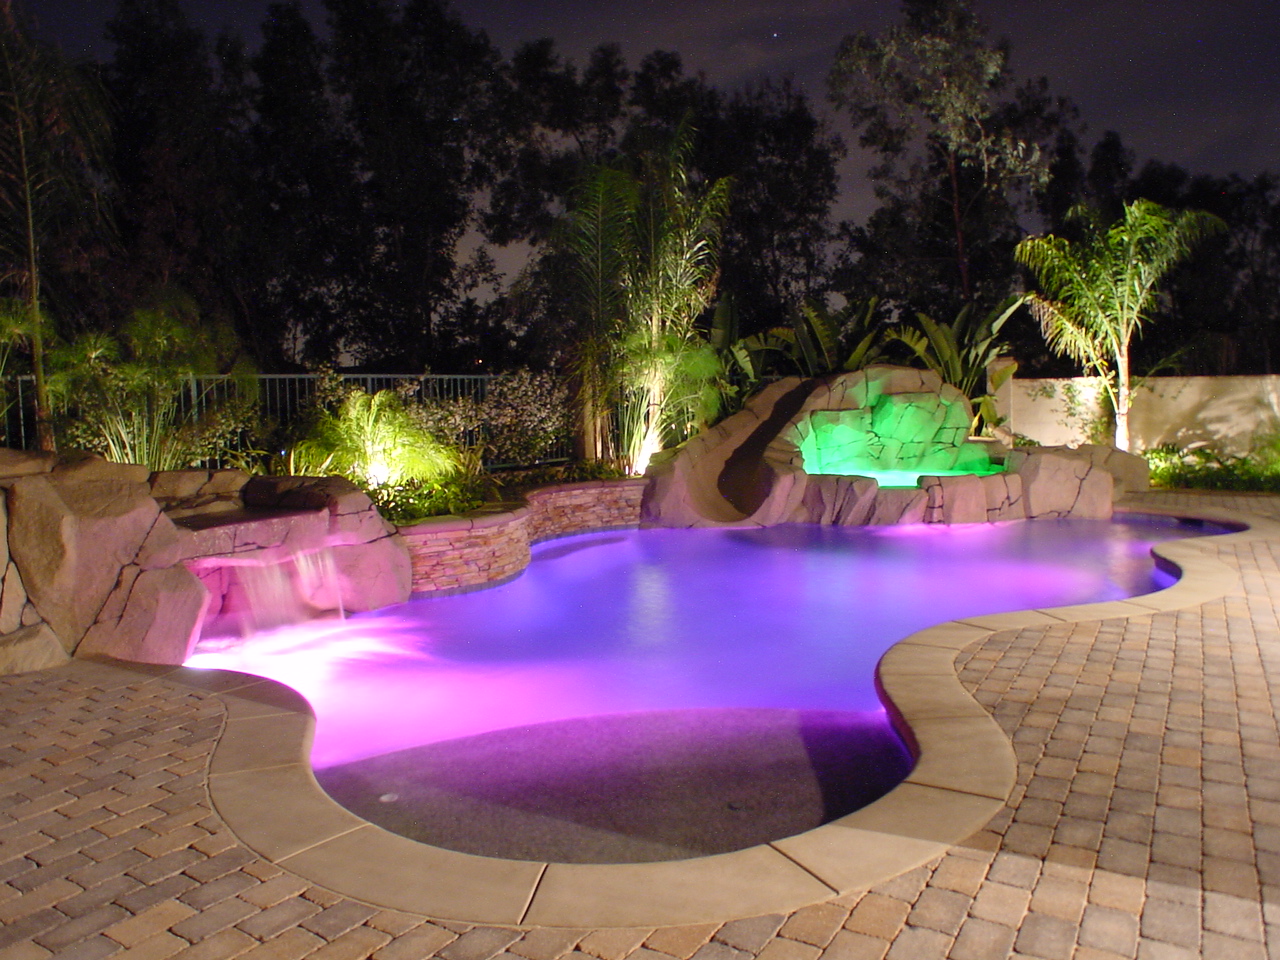 Pool-Designs-With-Waterfalls-micq